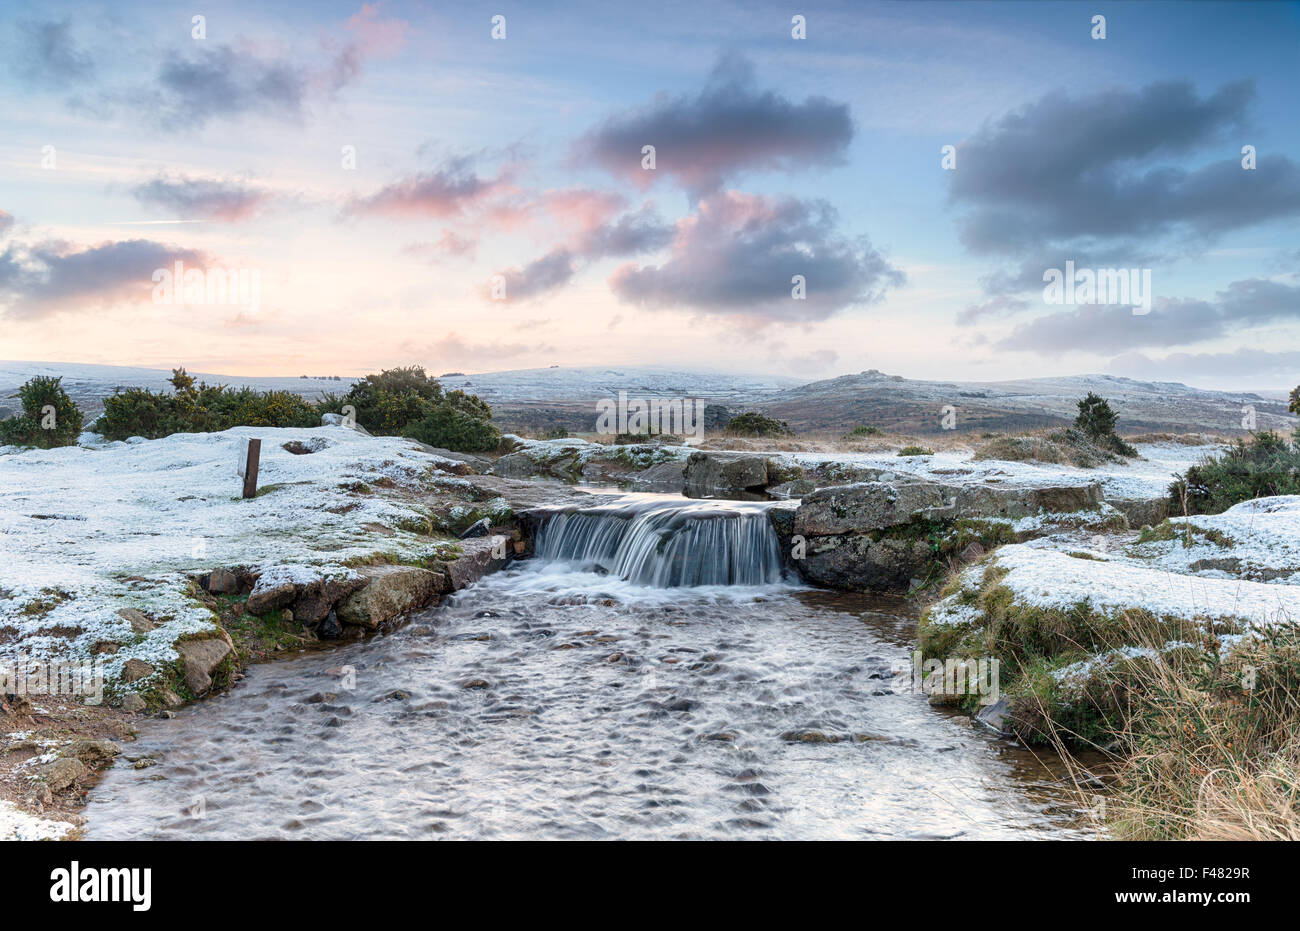 An idyllic winter scene with snow on the ground and a beautiful waterfall, on Dartmoor National Park in Devon Stock Photo